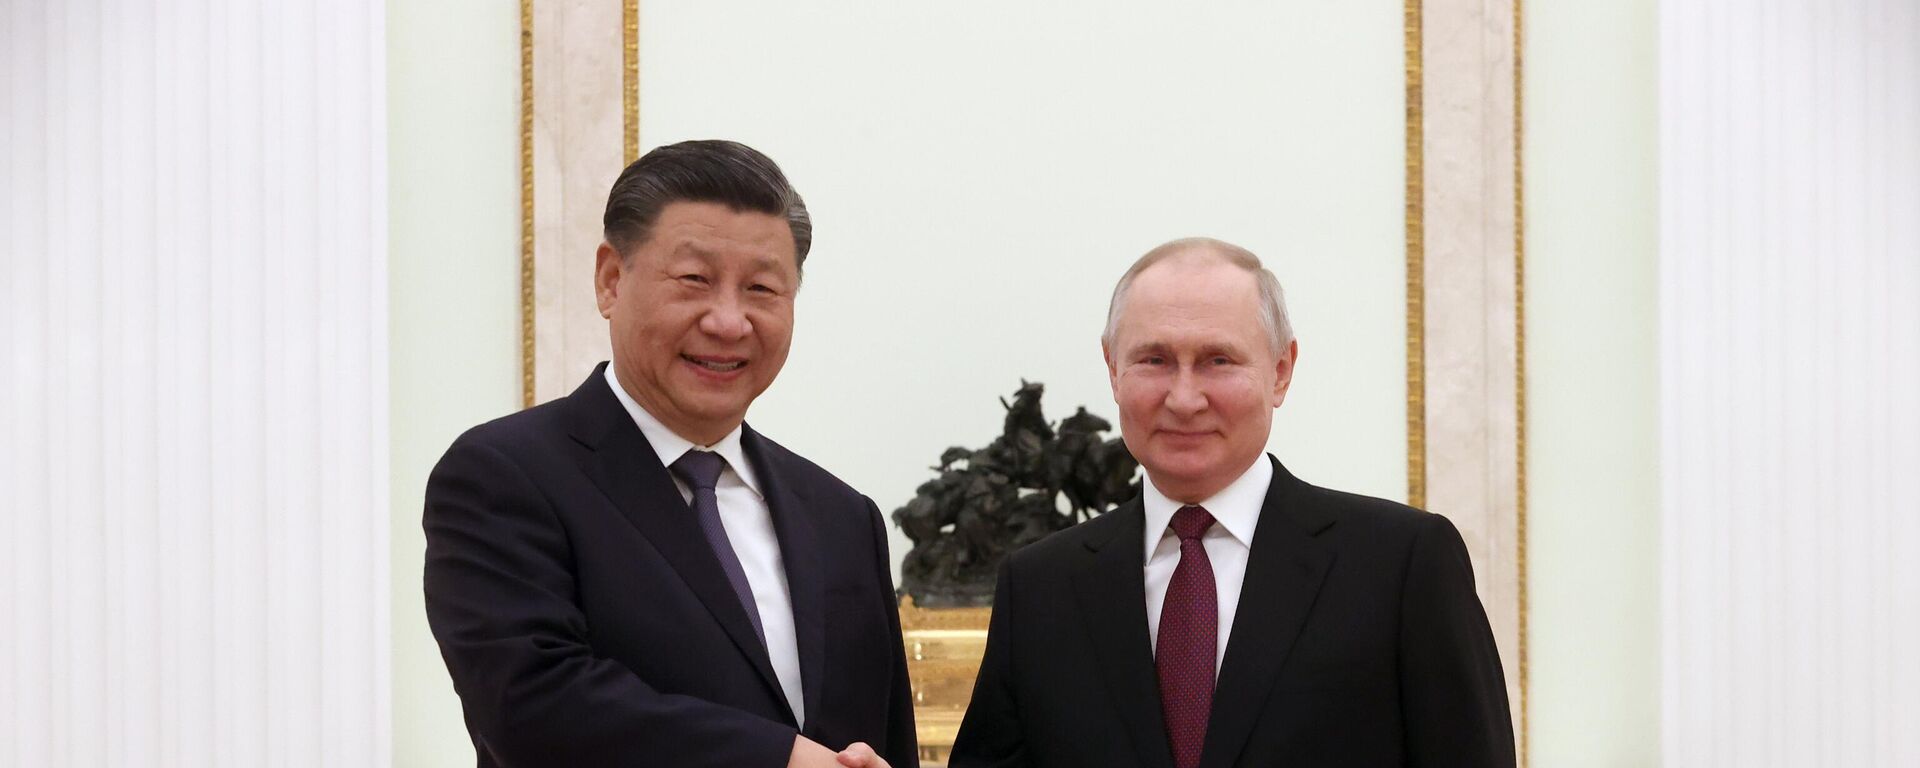 Chinese President Xi Jinping and Russian President Vladimir Putin shake hands during their meeting at the Kremlin in Moscow, Russia. - Sputnik International, 1920, 21.11.2023